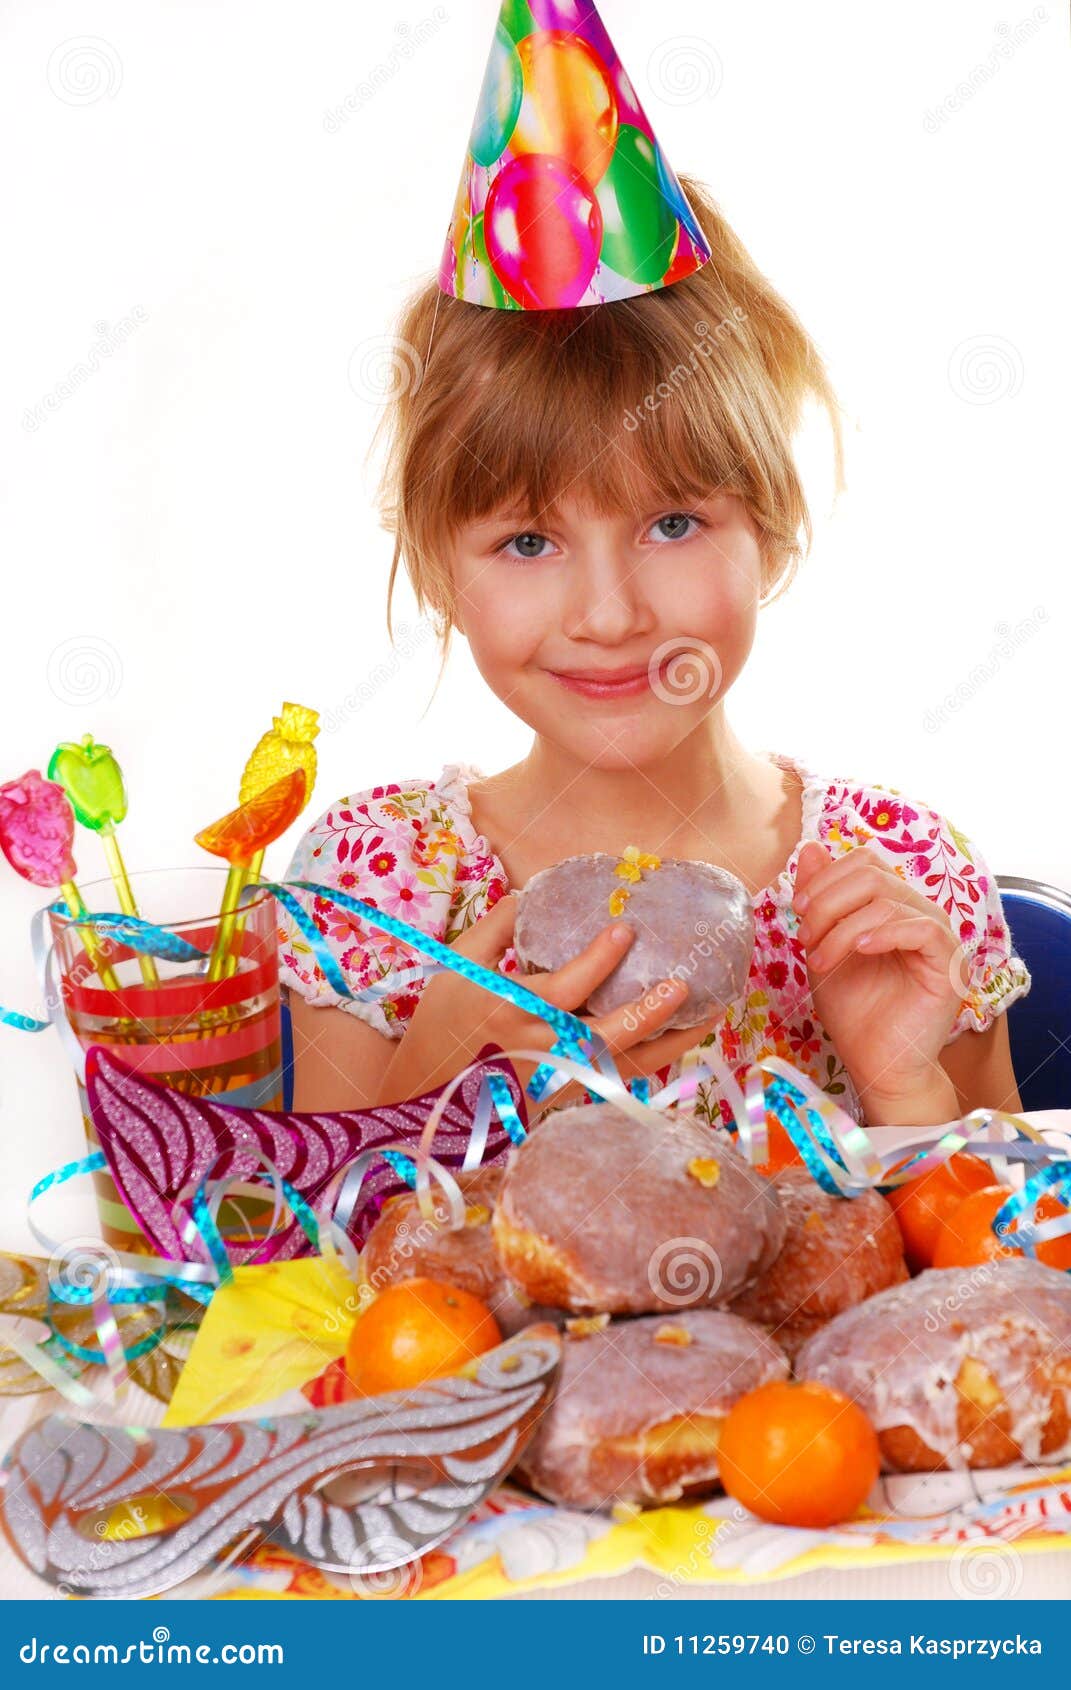  Little  Girl  On Birthday  Party  Stock Photo Image 11259740